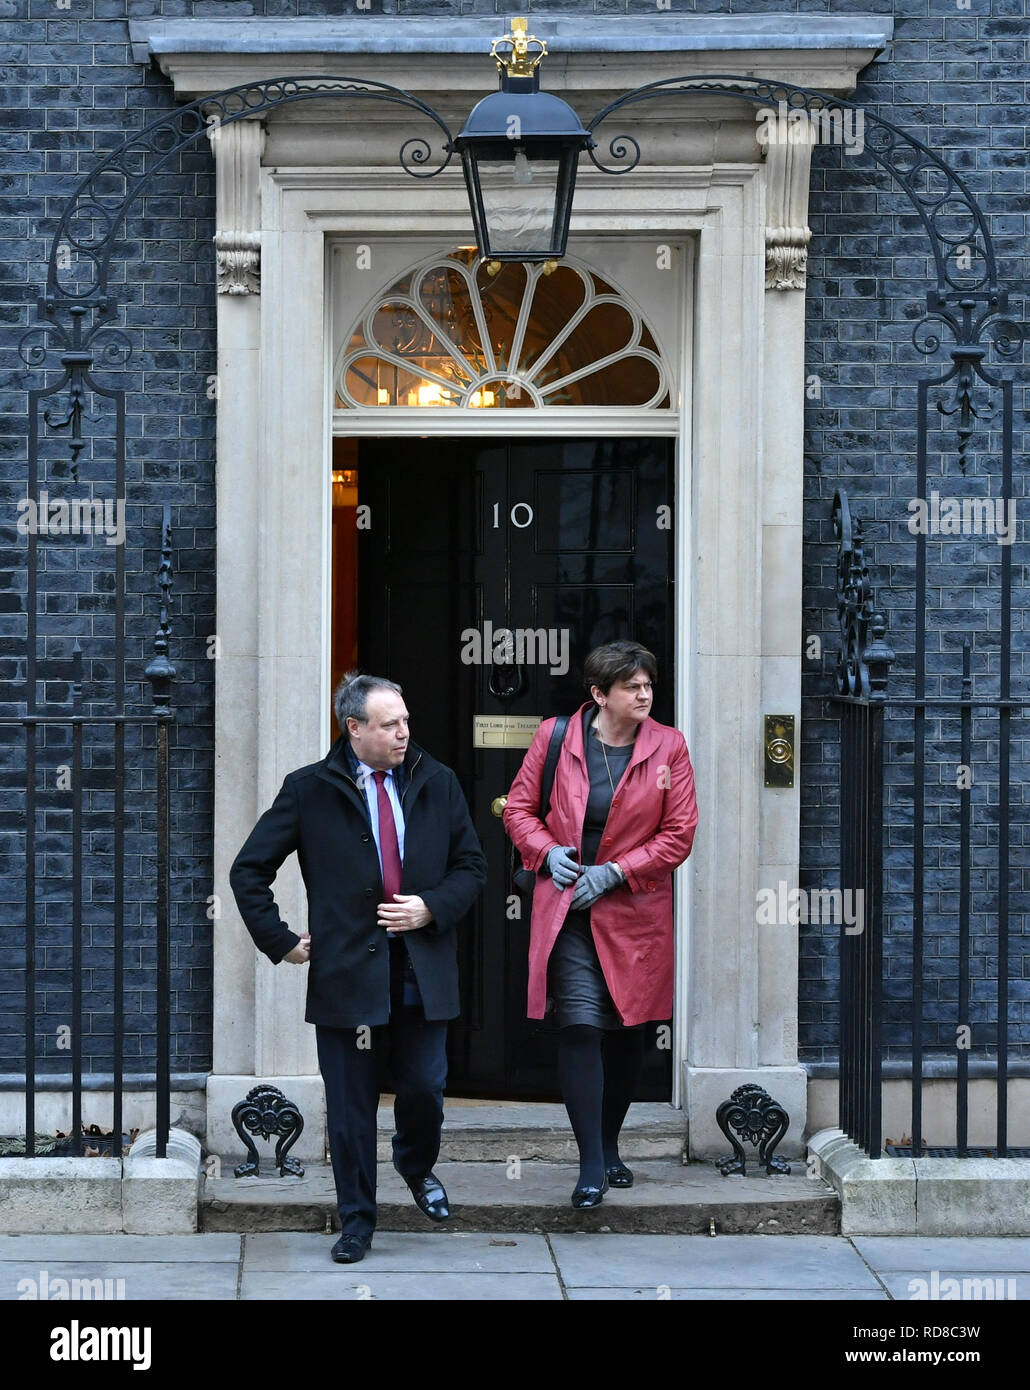 DUP deputy leader Nigel Dodds and DUP Leader Arlene Foster in Downing Street, London, after the Prime Minister announced that she would invite party leaders in the Commons and other MPs in for discussions to get a Parliamentary consensus on the way forward over Brexit. Stock Photo